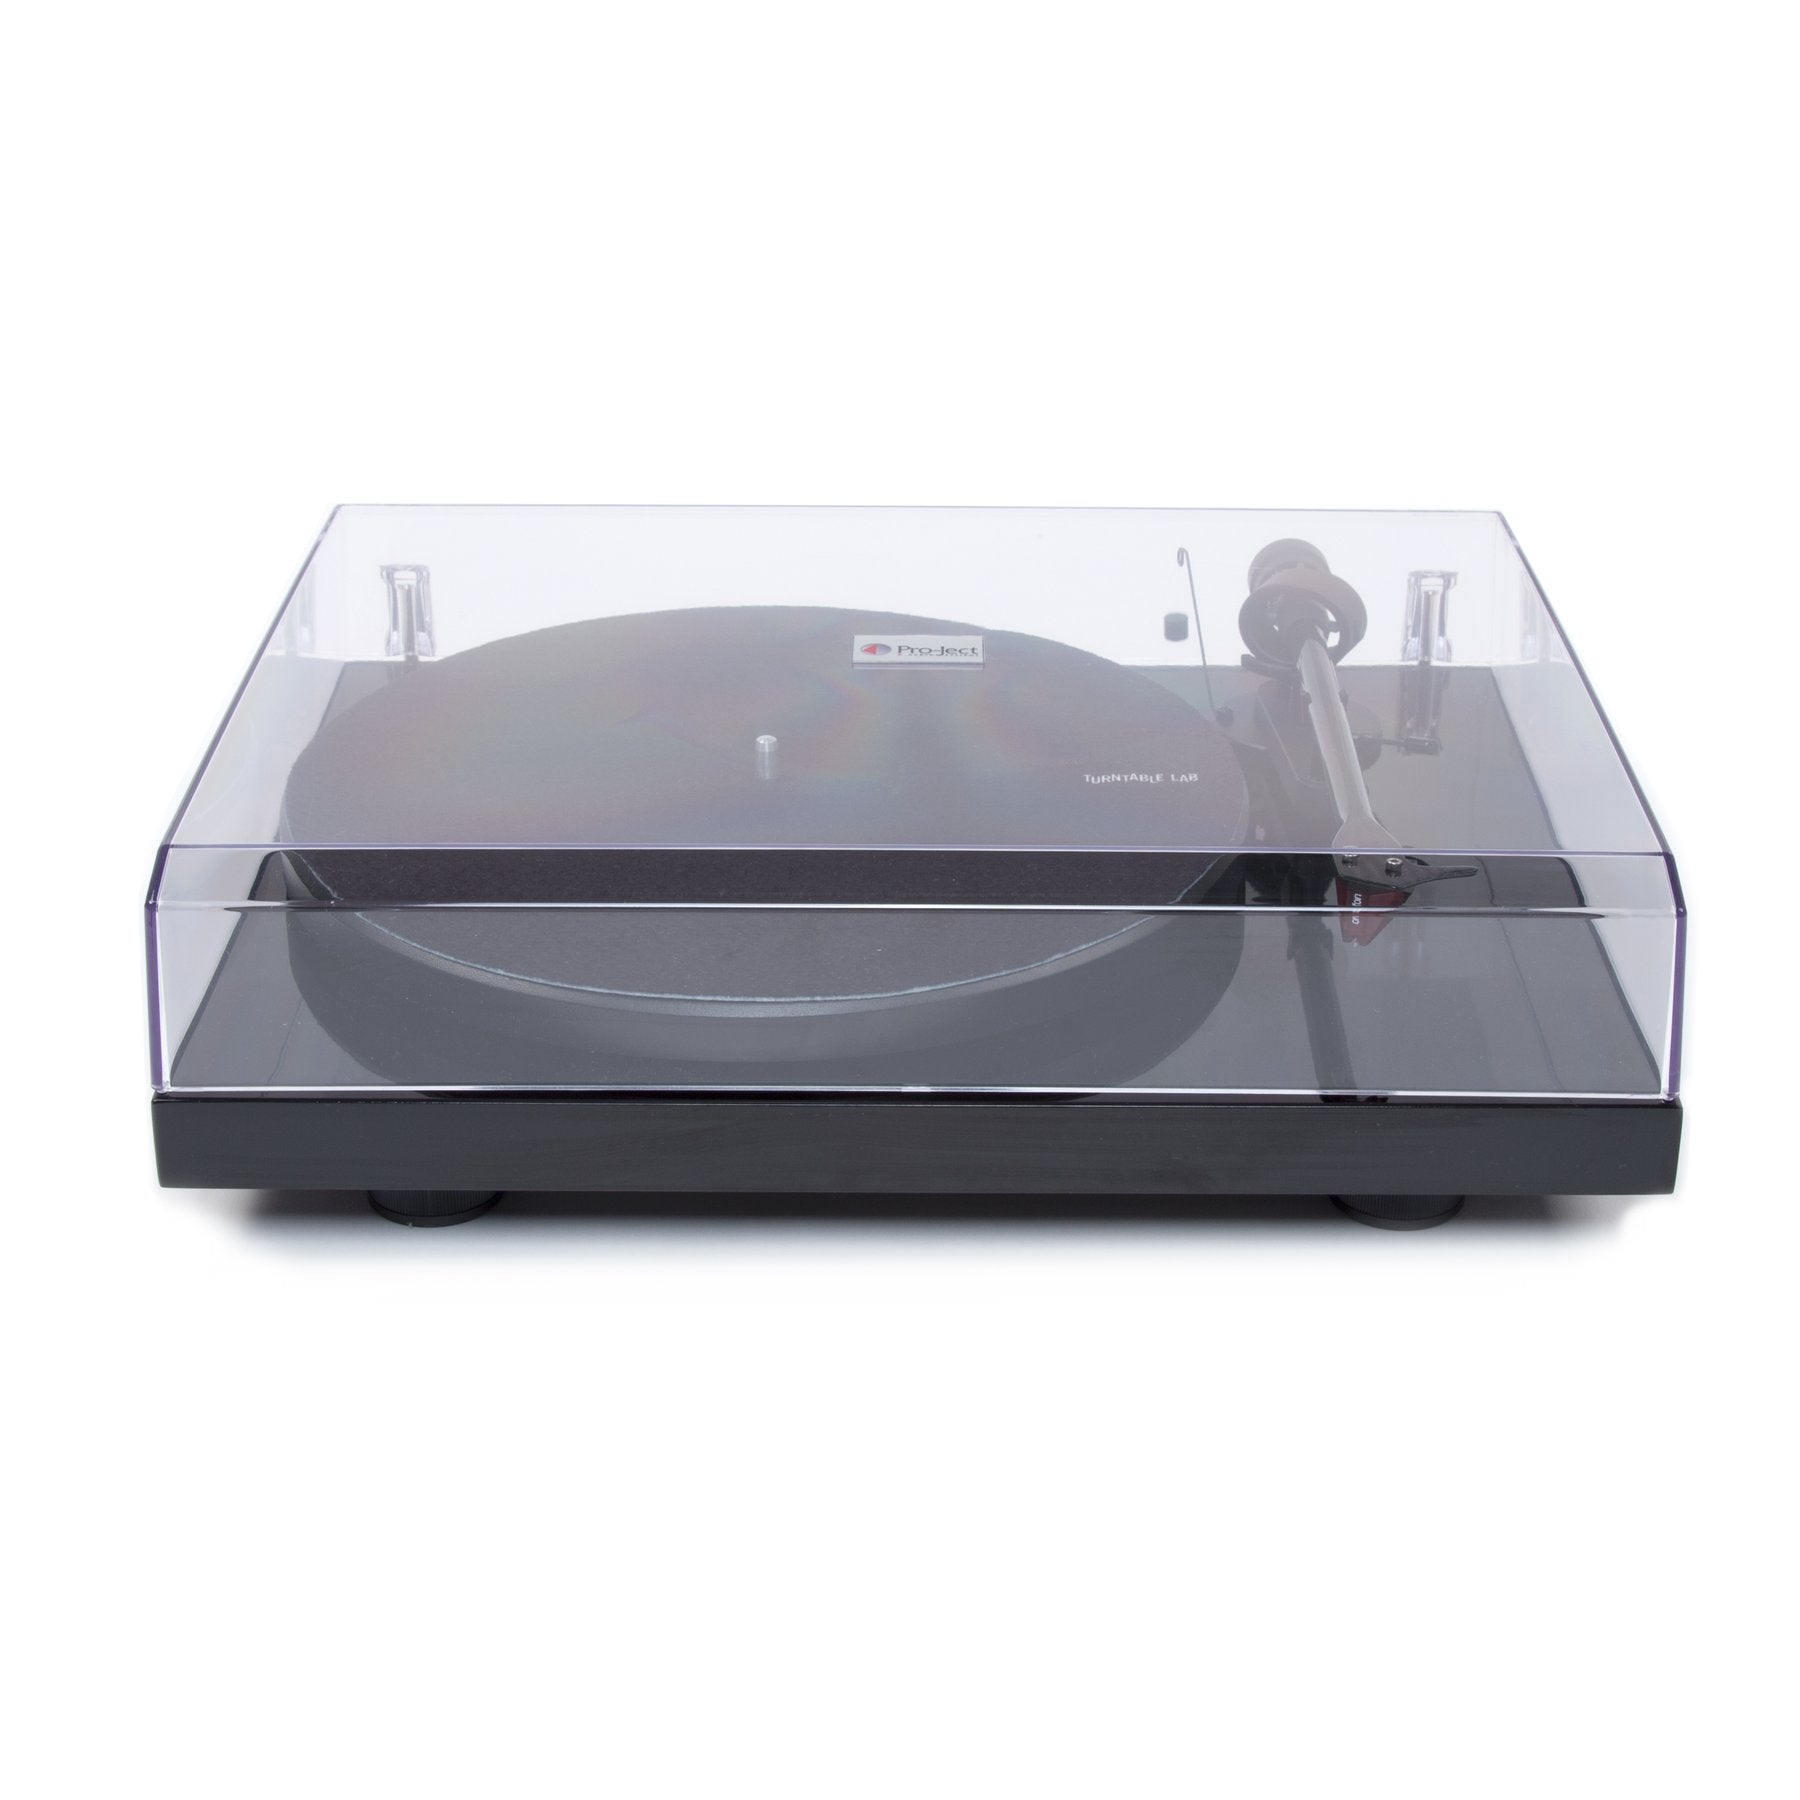 Pro-Ject: Debut Carbon DC Turntable - Silver